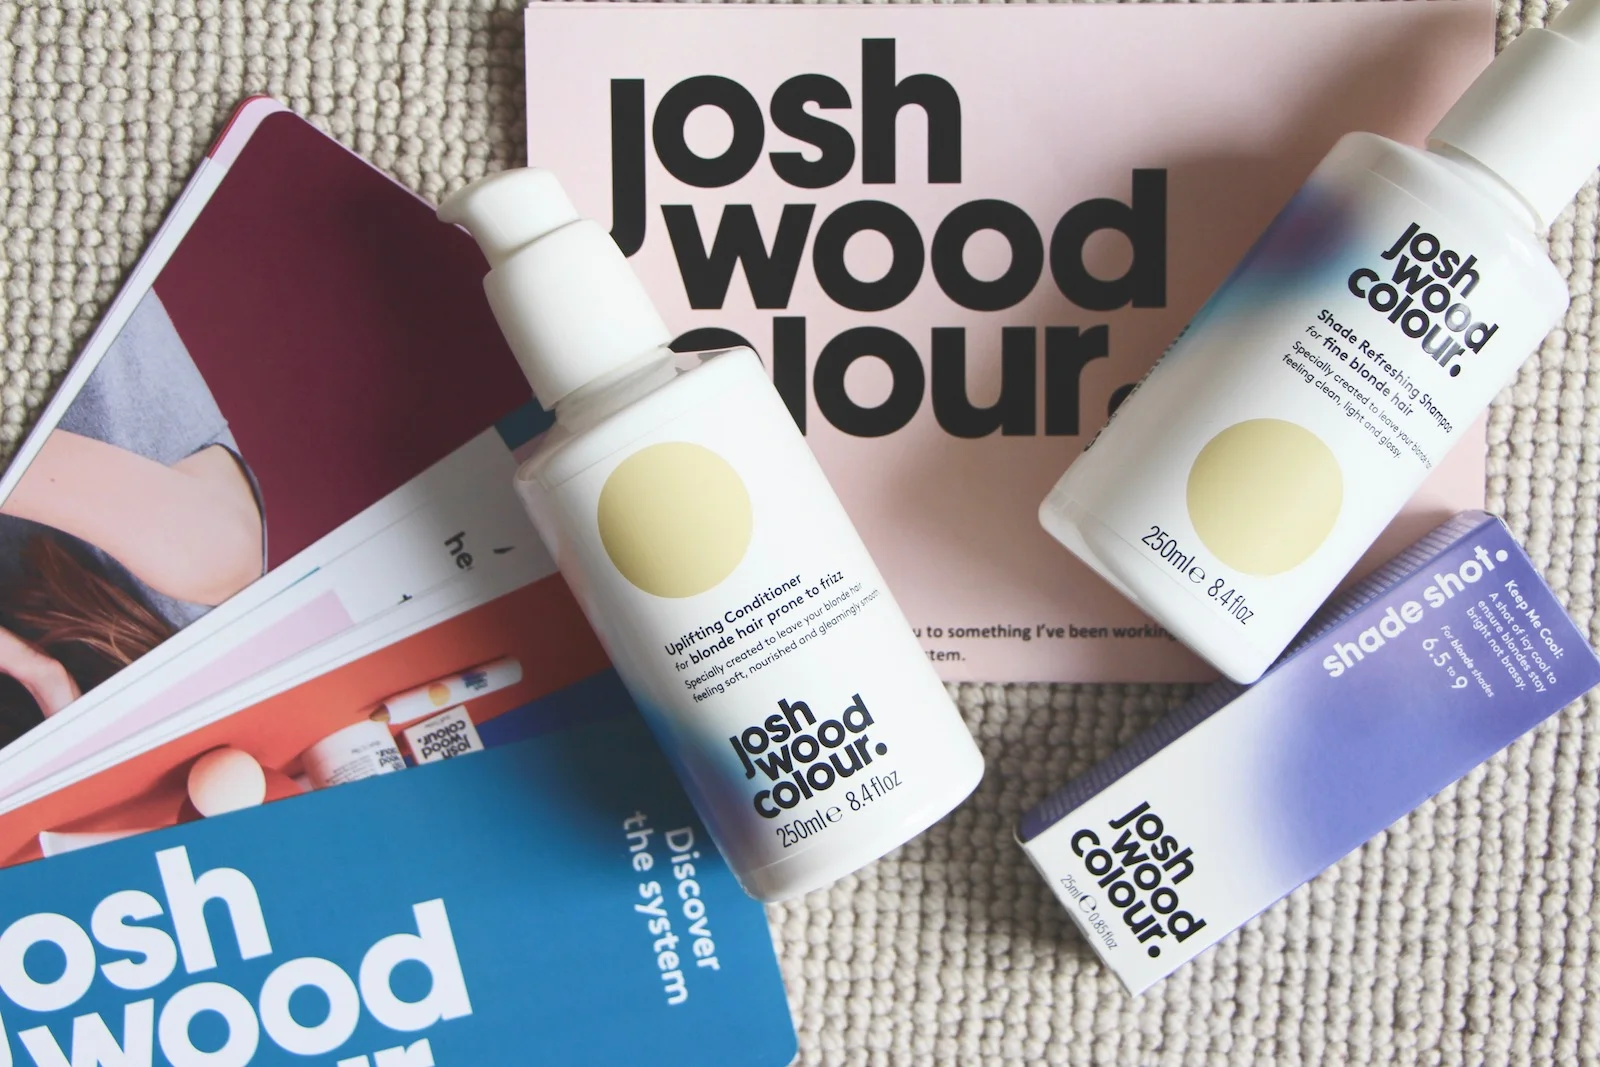 Josh Wood Colour: The Ultimate Hair Colour System